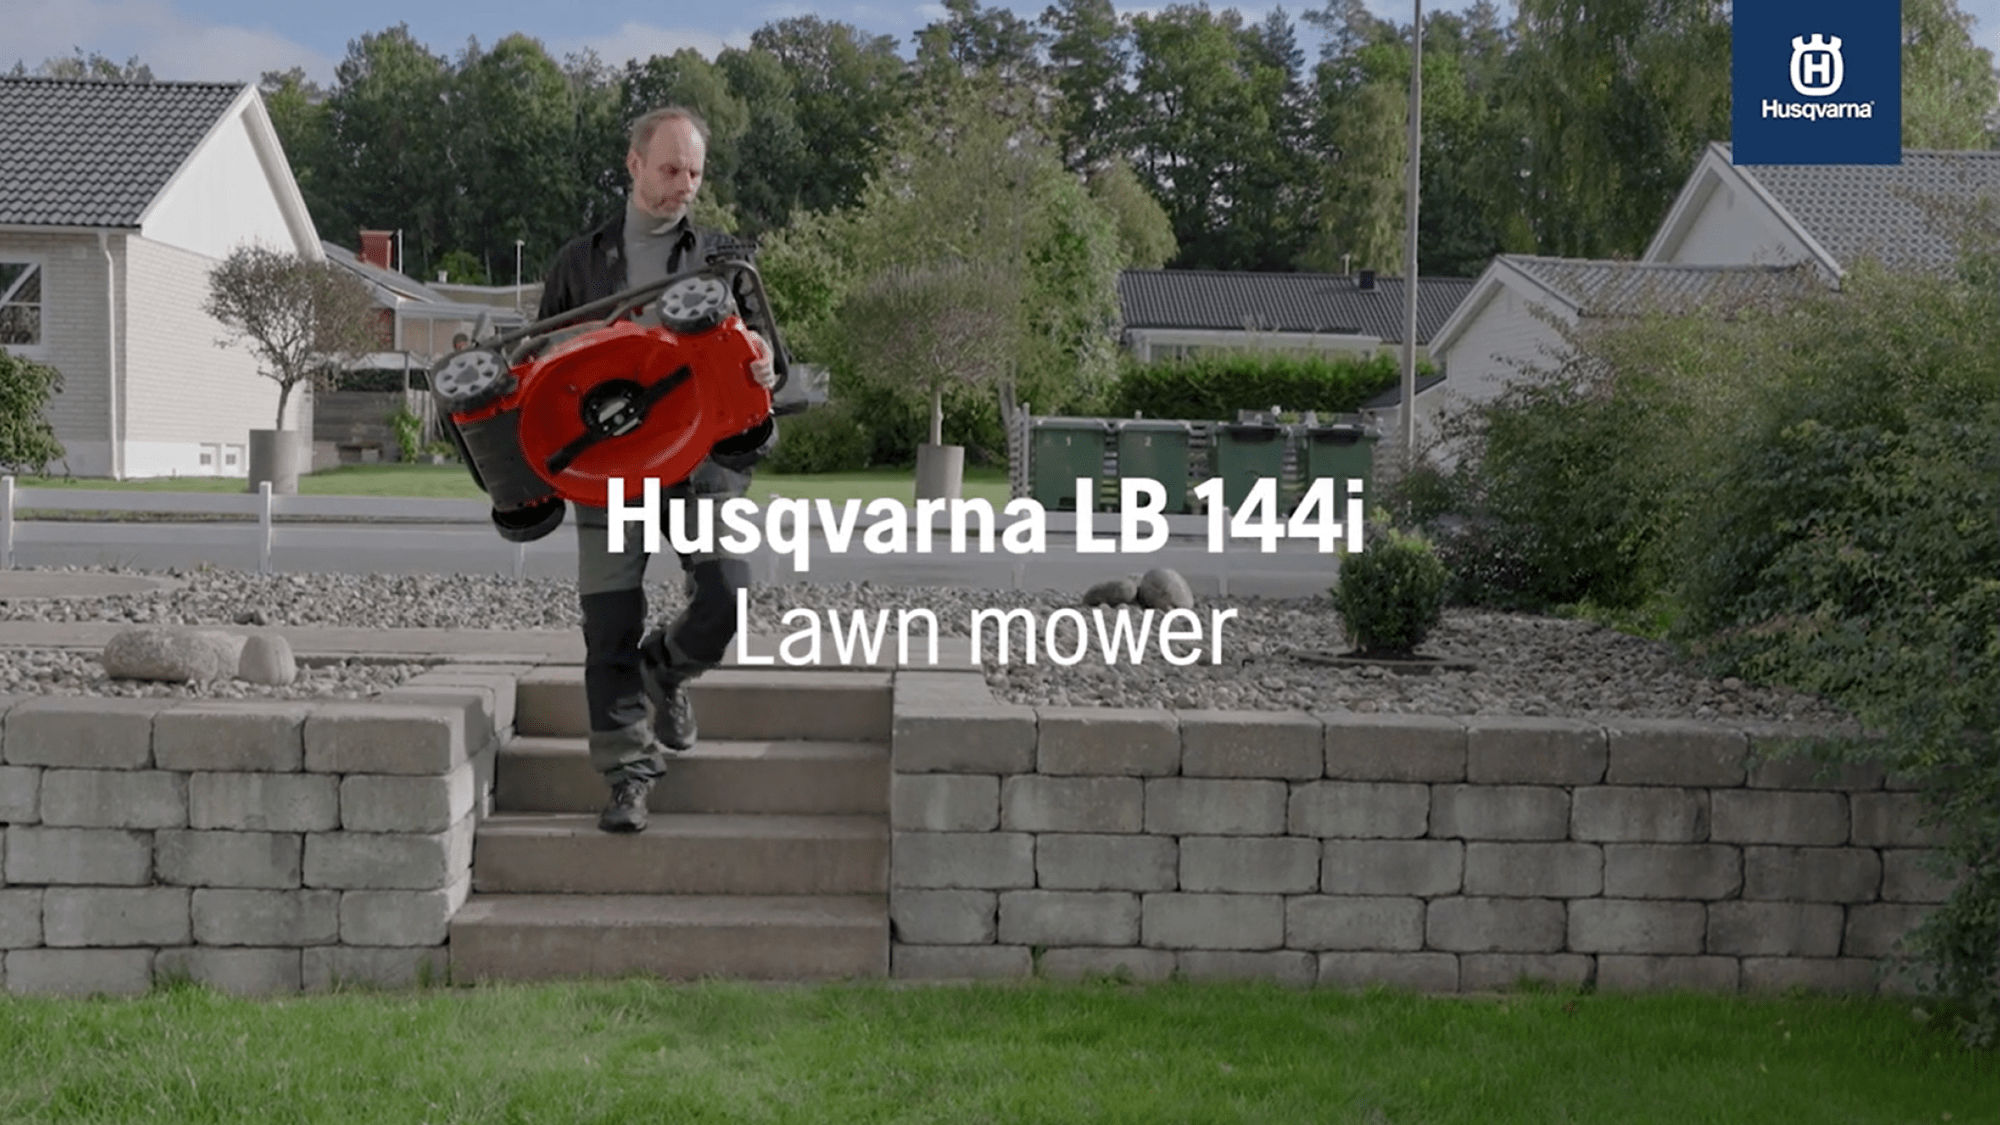 Lawn mower LB 144i Feature Benefit